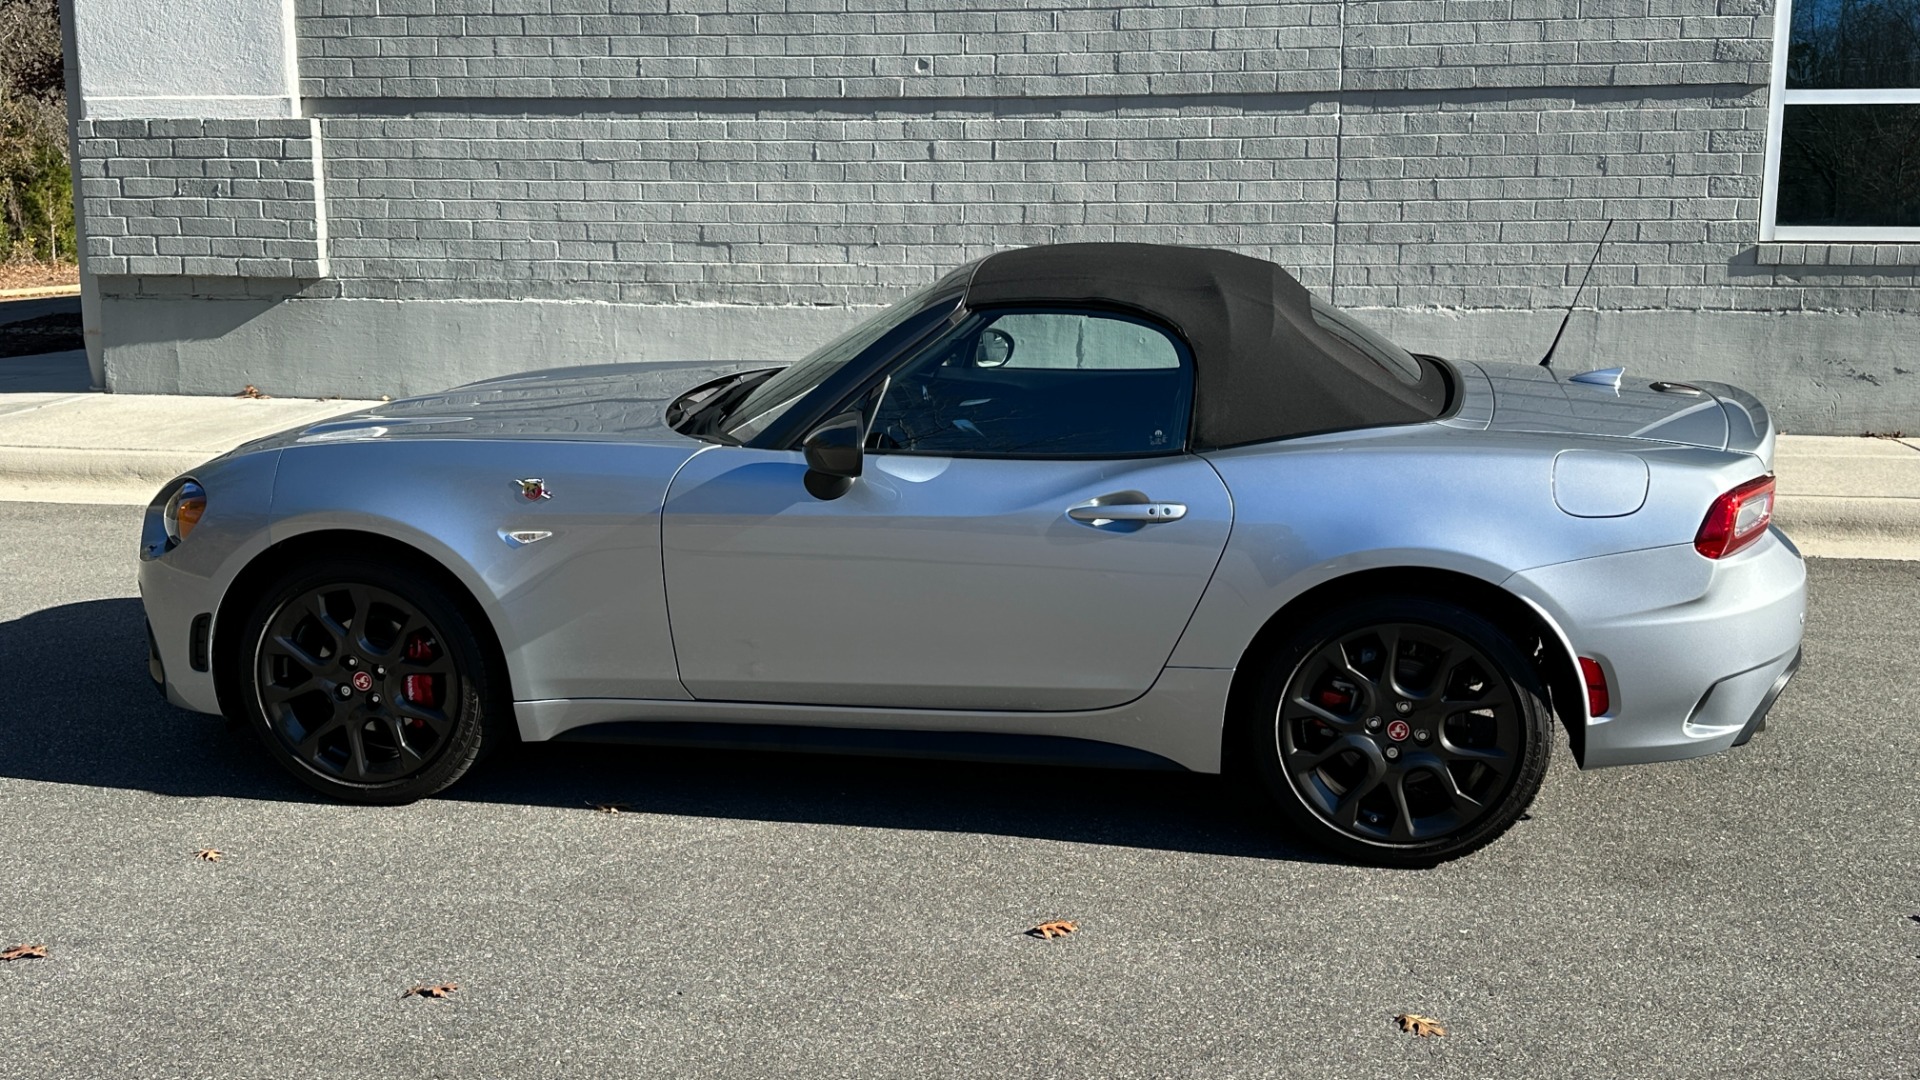 Used 2020 FIAT 124 Spider ARBARTH / MONZA EXHAUST / RECARO SPORT SEATS / BREMBO BRAKES / 6 SPEED for sale $29,995 at Formula Imports in Charlotte NC 28227 6